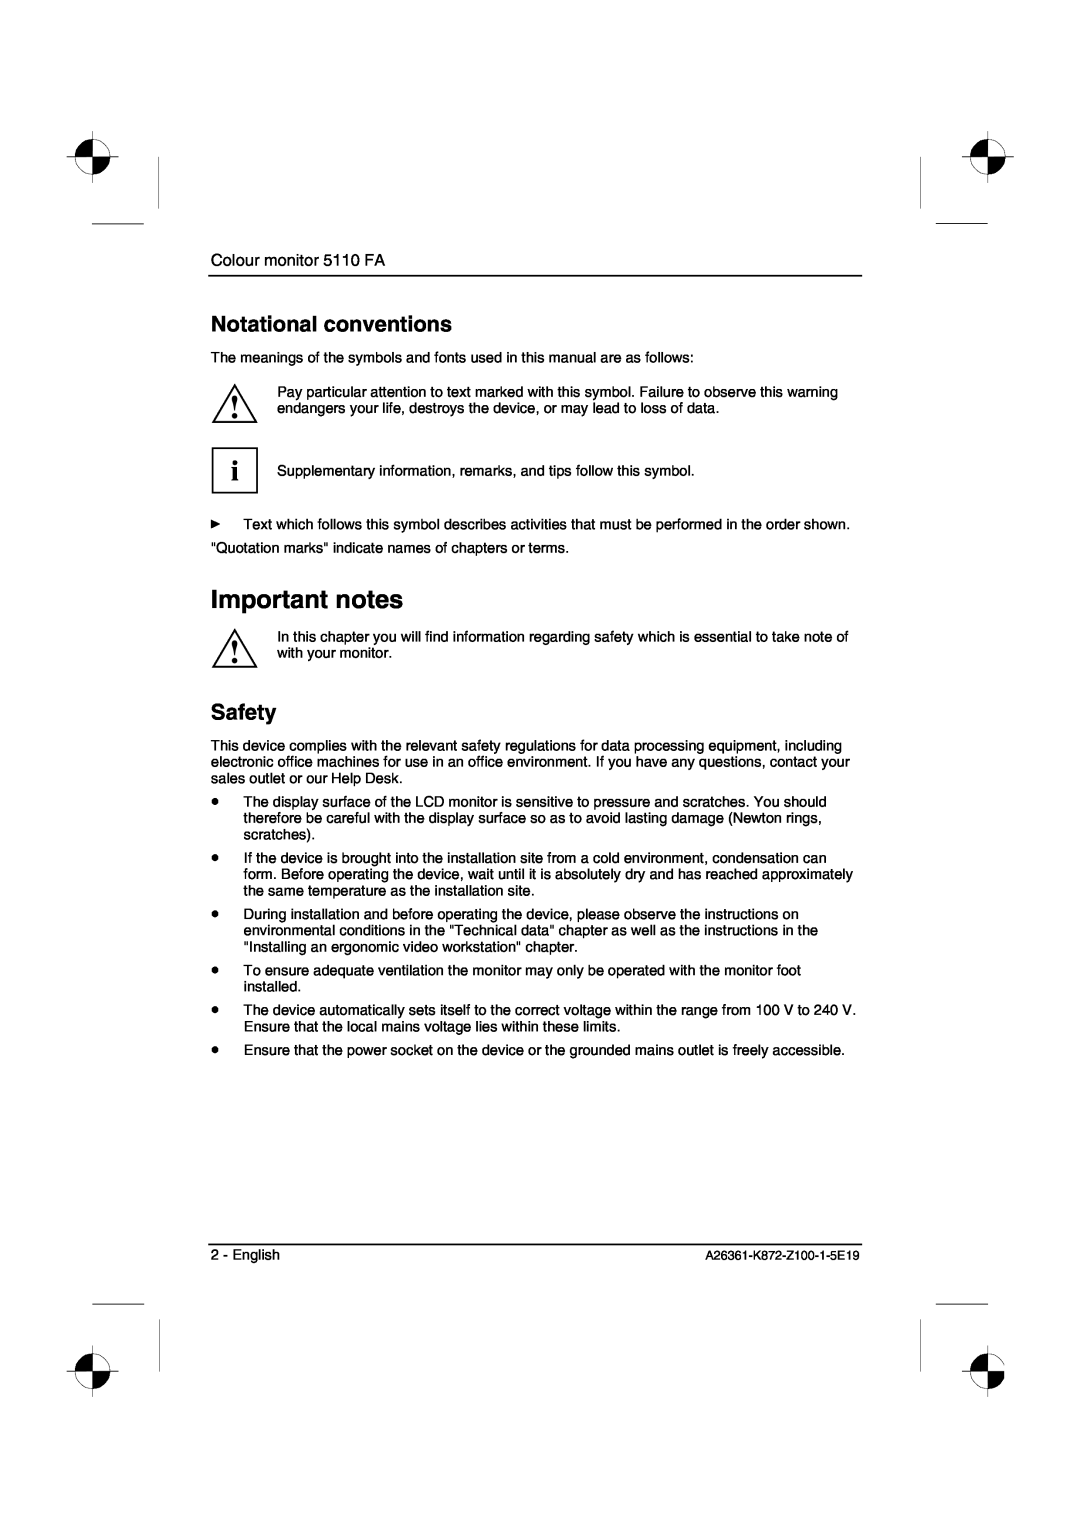 Fujitsu Siemens Computers manual Important notes, Notational conventions, Safety, Colour monitor 5110 FA 